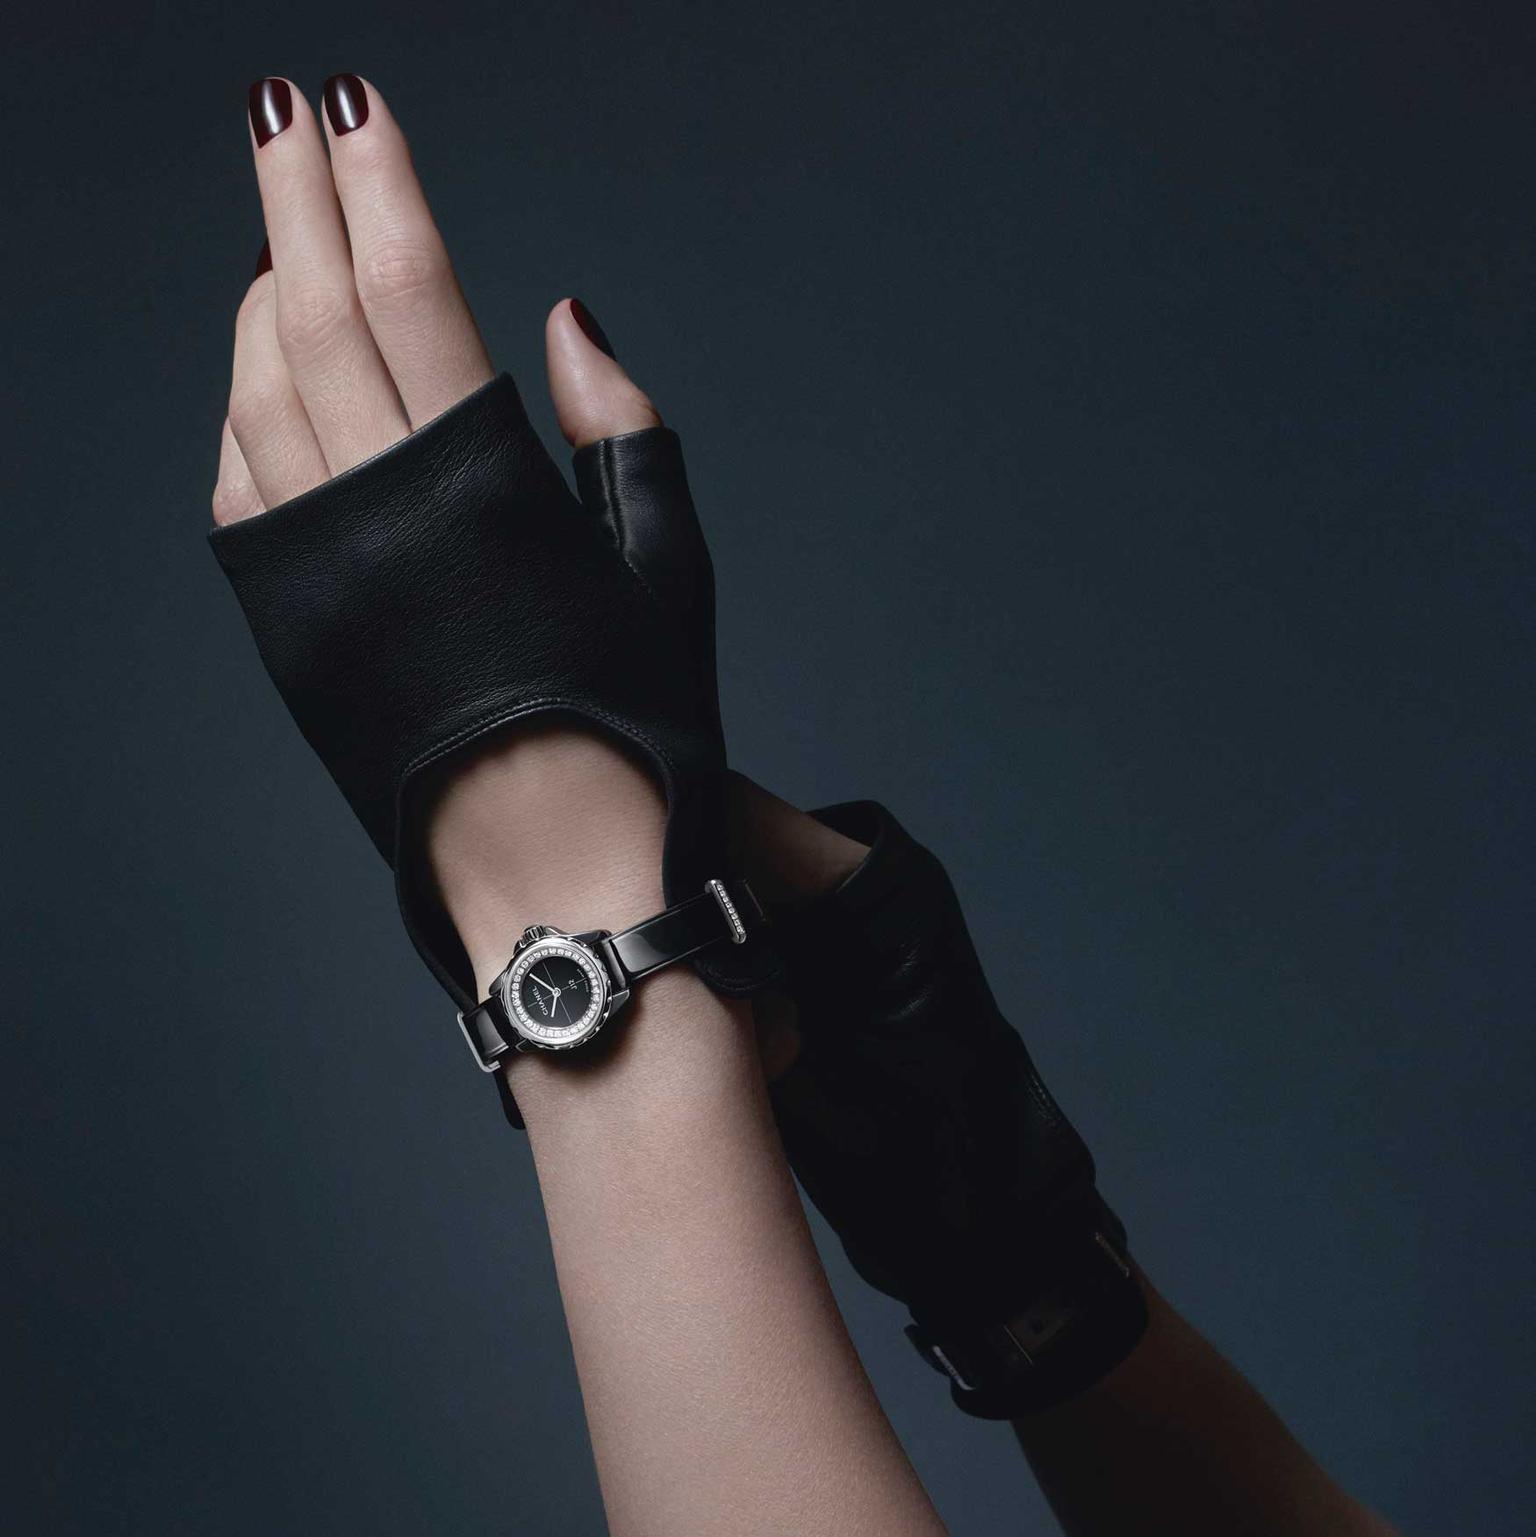 chanel j12 xs watch with fingerless gloves.jpg 1536x0 q75 crop scale subsampling 2 upscale false